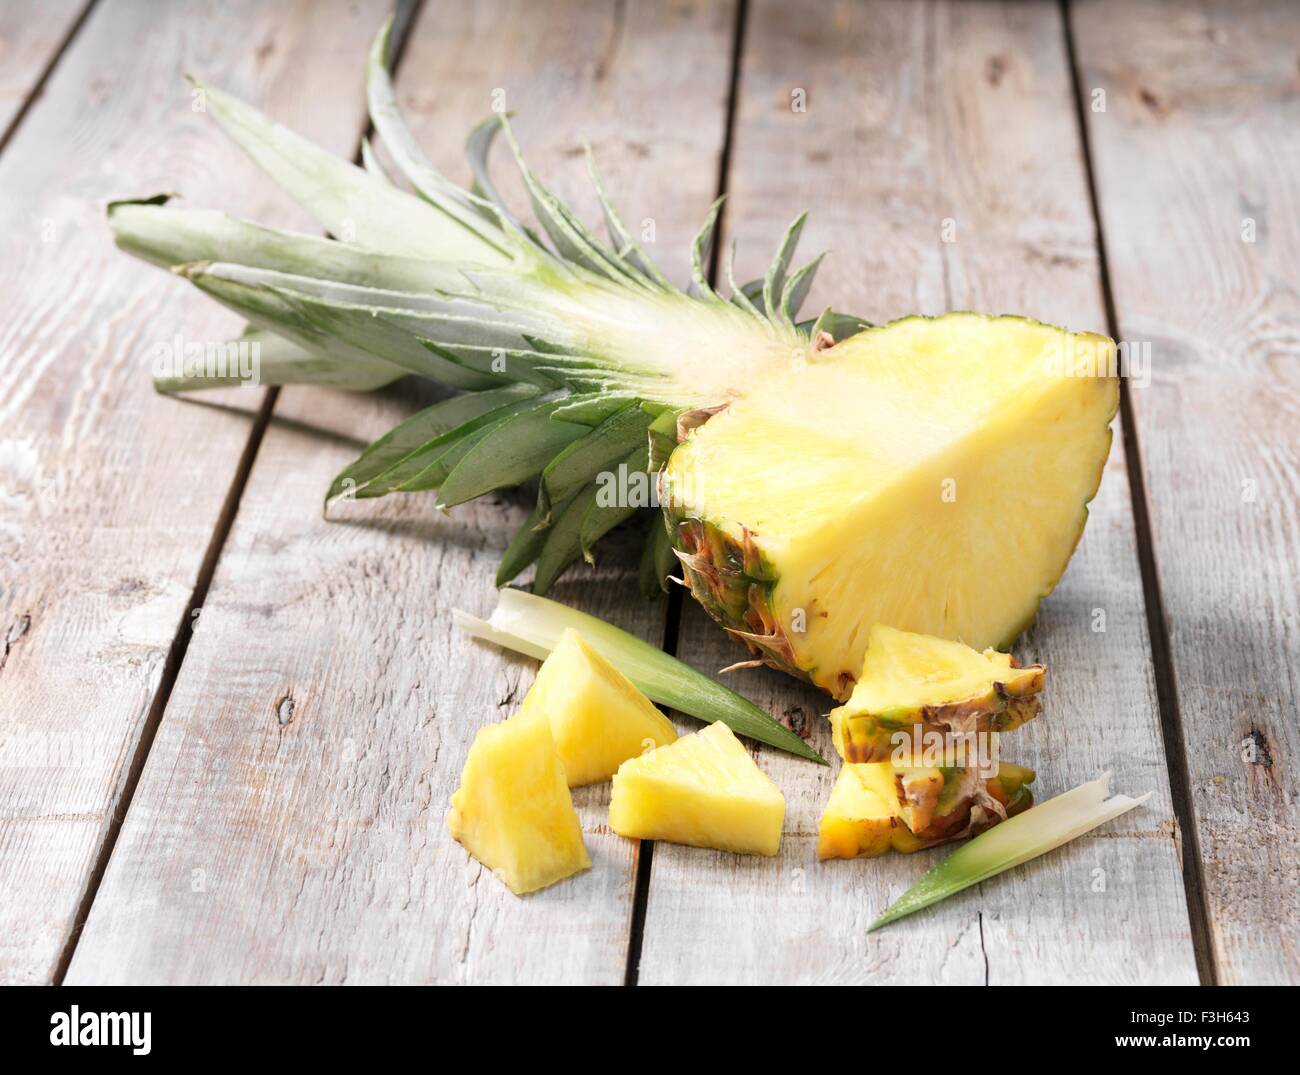 Quarter pineapple and leaves on whitewashed wooden table Stock Photo